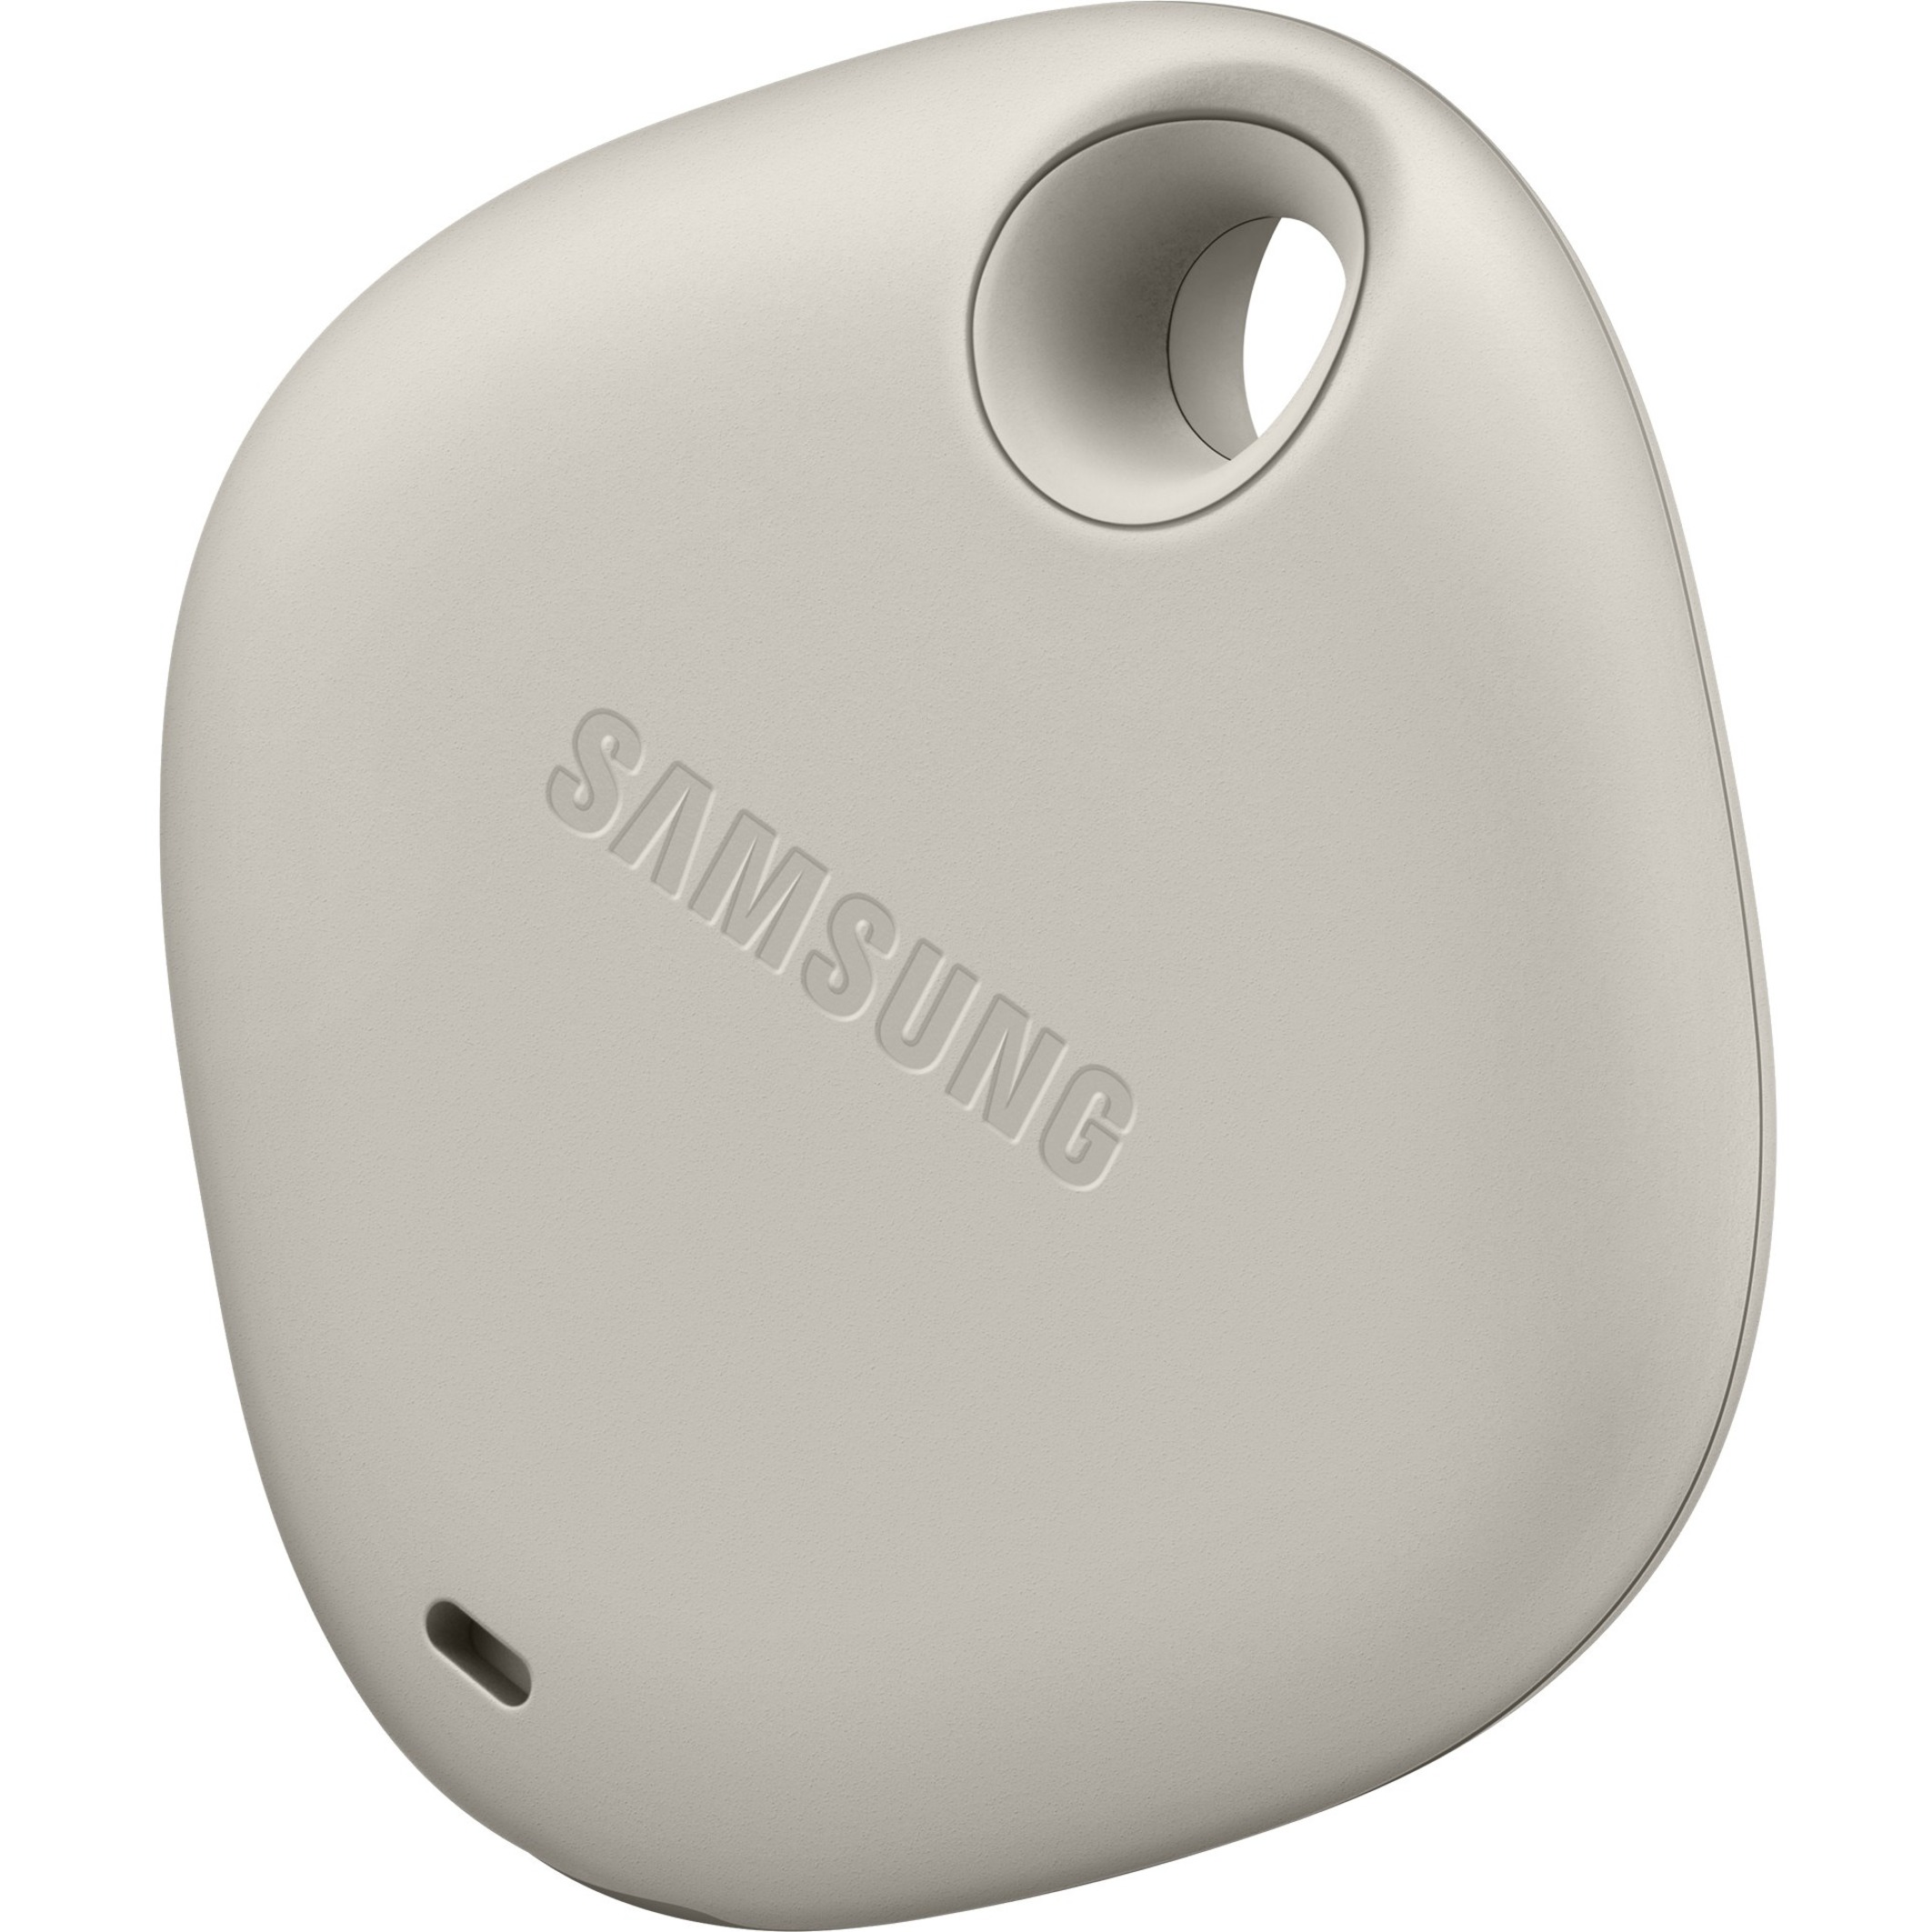 Samsung Galaxy SmartTag, 1-Pack, Oatmeal - image 5 of 8